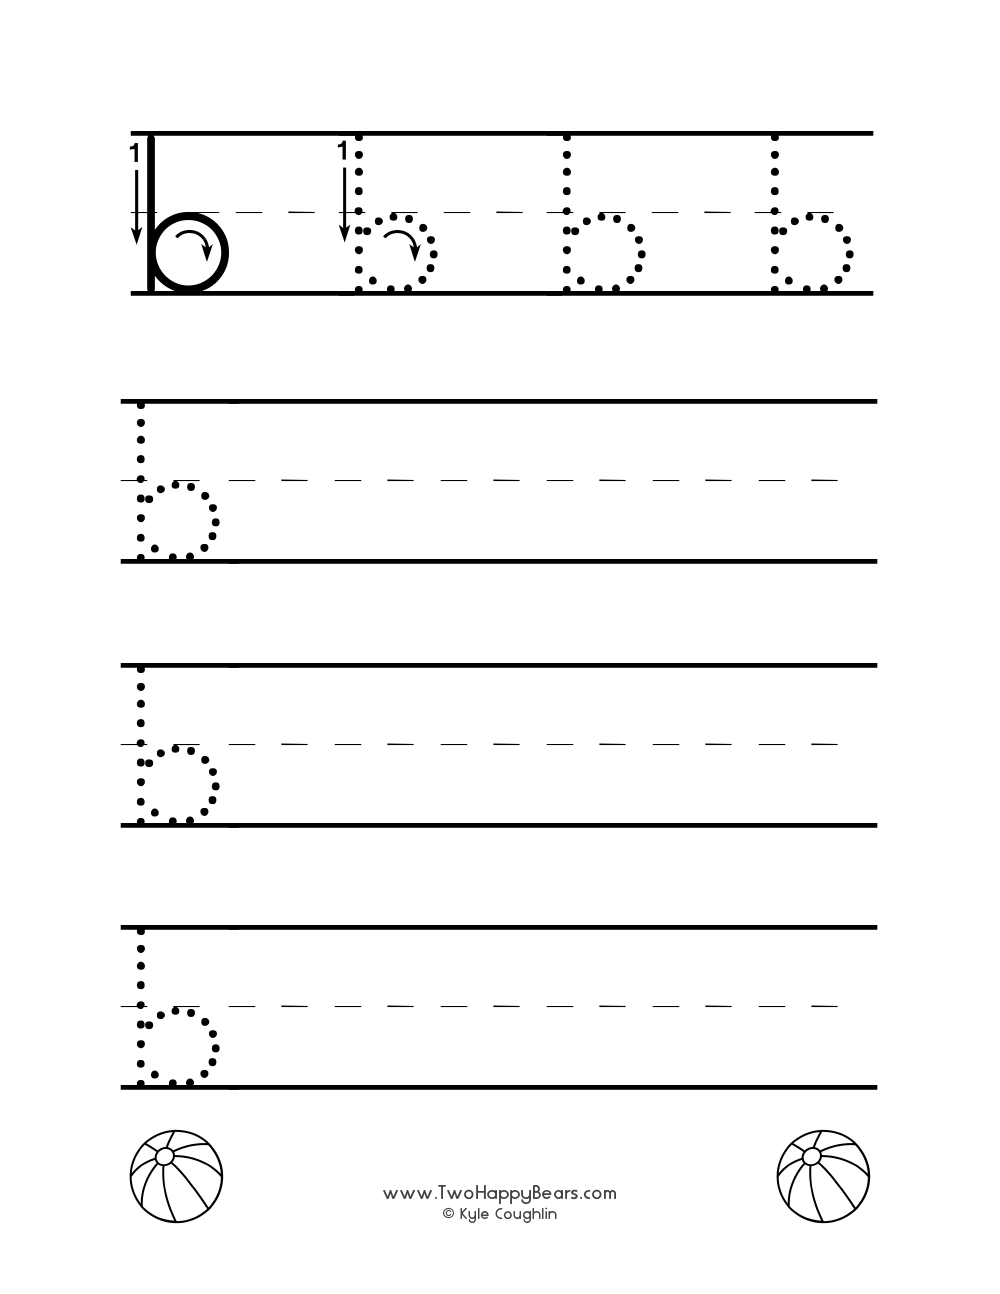 Worksheet for tracing and writing the lowercase letter B, in free printable PDF format.